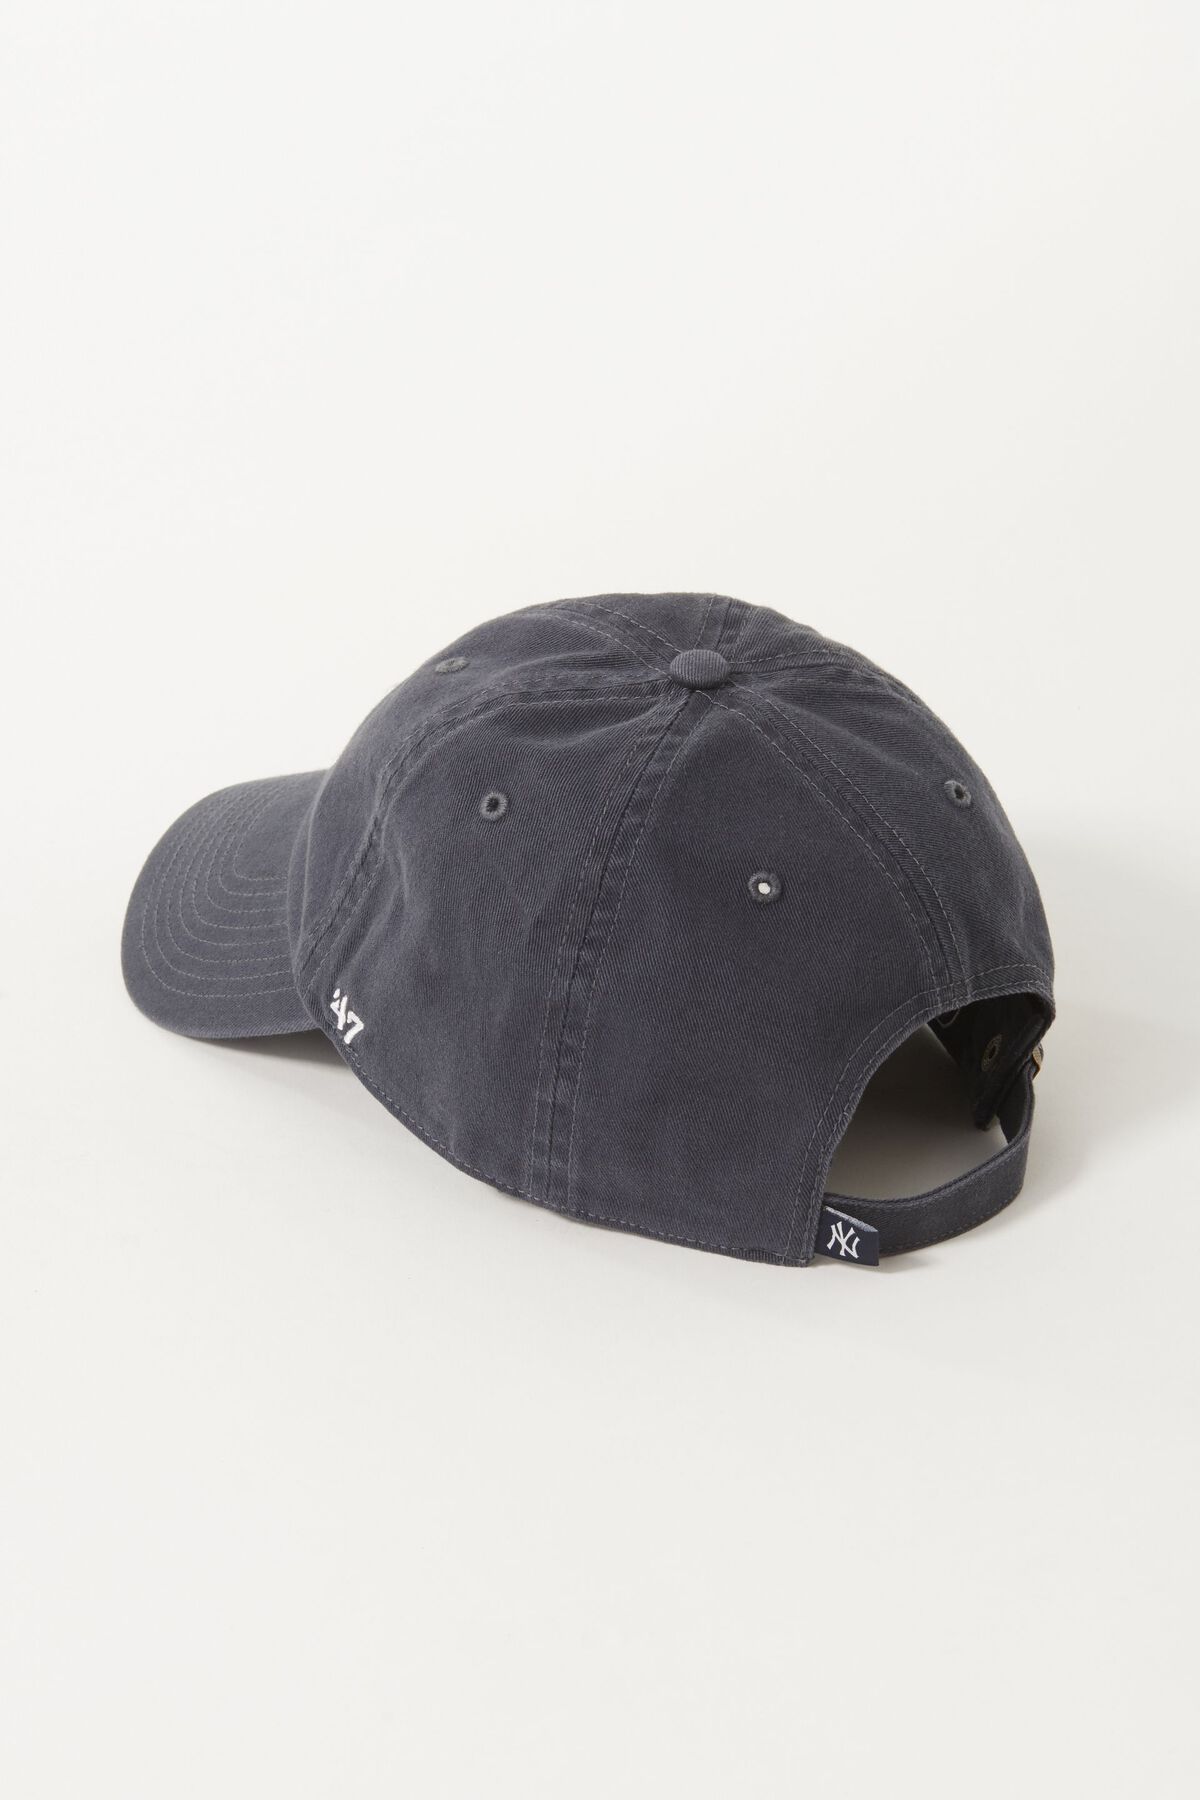 Garage 47 BRAND Clean Up Cap - NY. 4